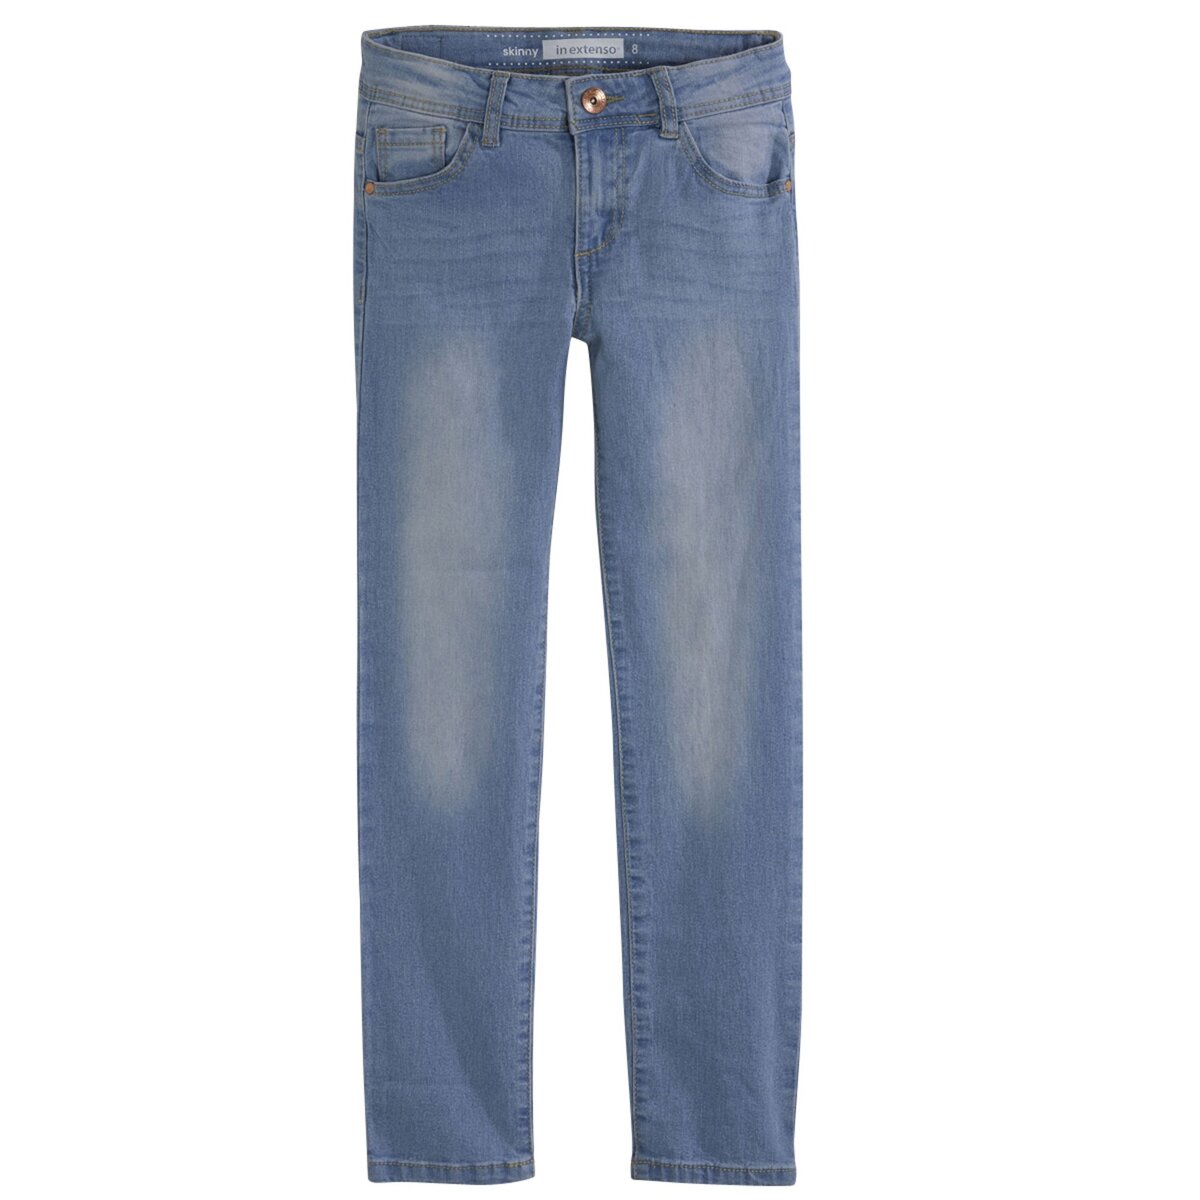 IN EXTENSO Jean 5 poches fille